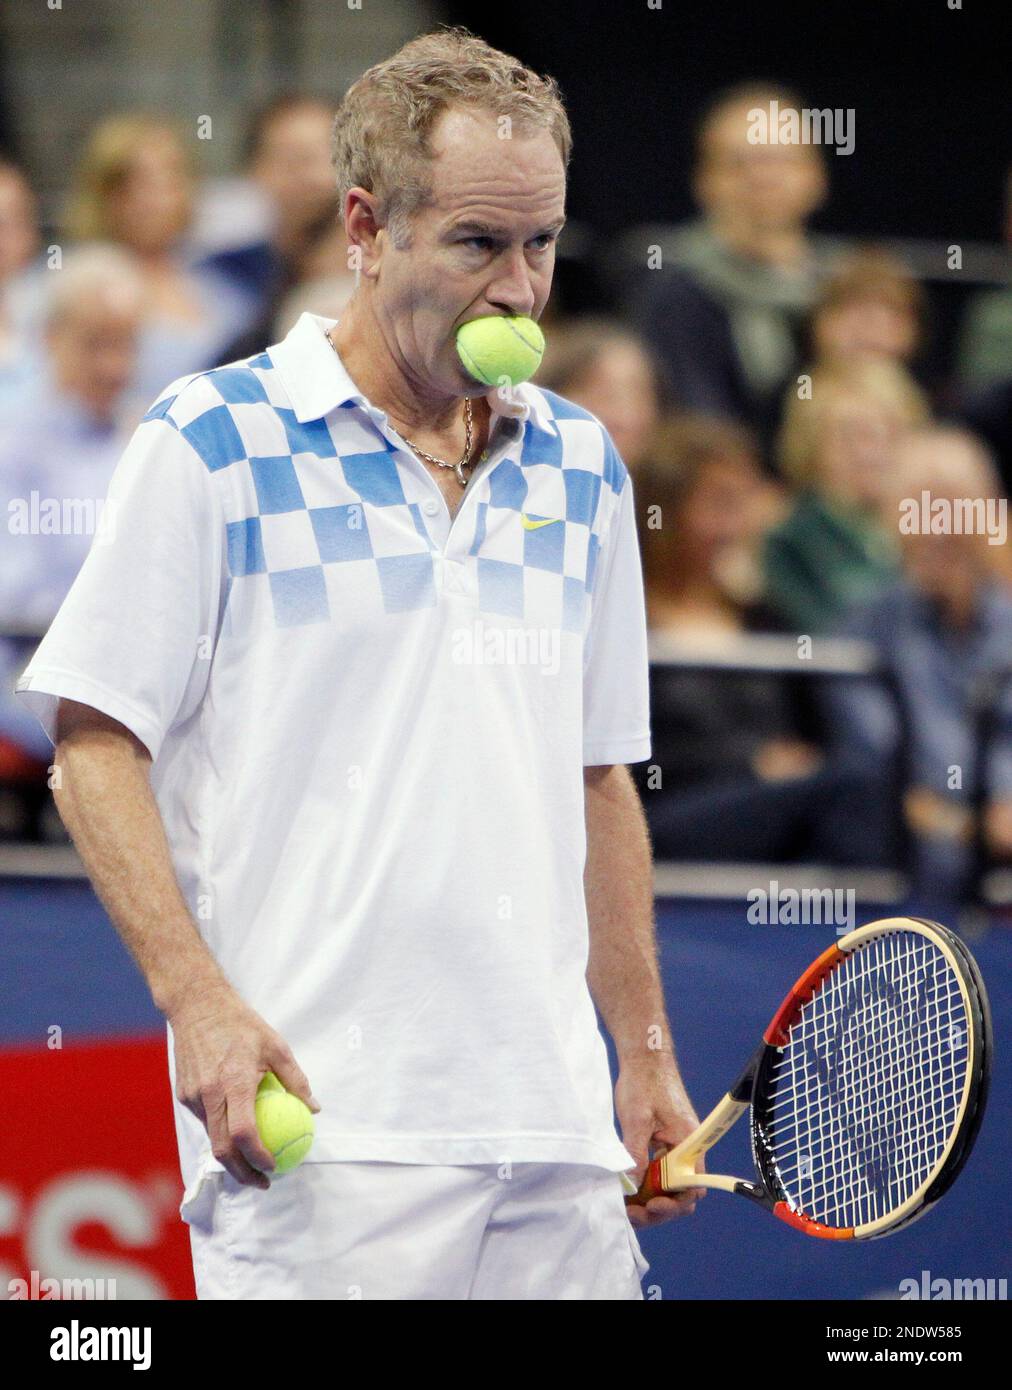 John McEnroe gets ready to serve the ball in a Champions Cup semifinal  tennis match against Bjorn Borg, Saturday, May 1, 2010, in Boston. McEnroe  won 6-4, 7-6 (7-3). (AP Photo/Michael Dwyer Stock Photo - Alamy